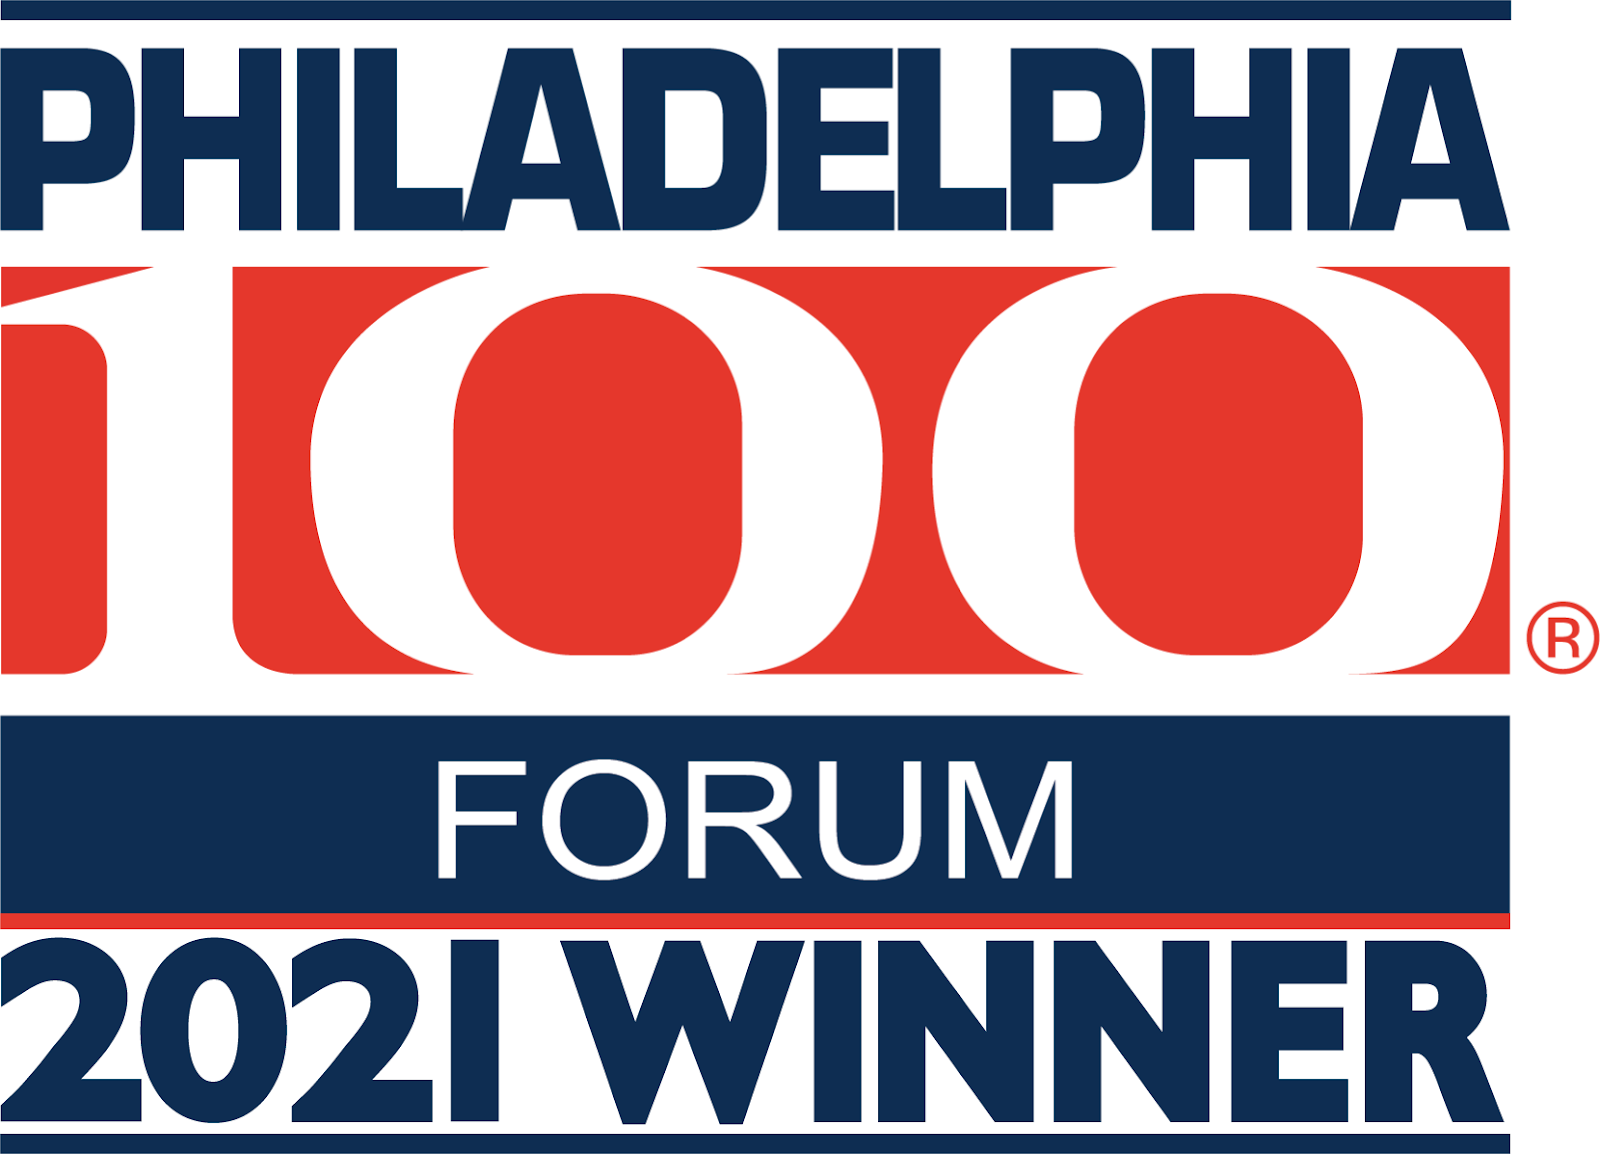 Philly 100 logo